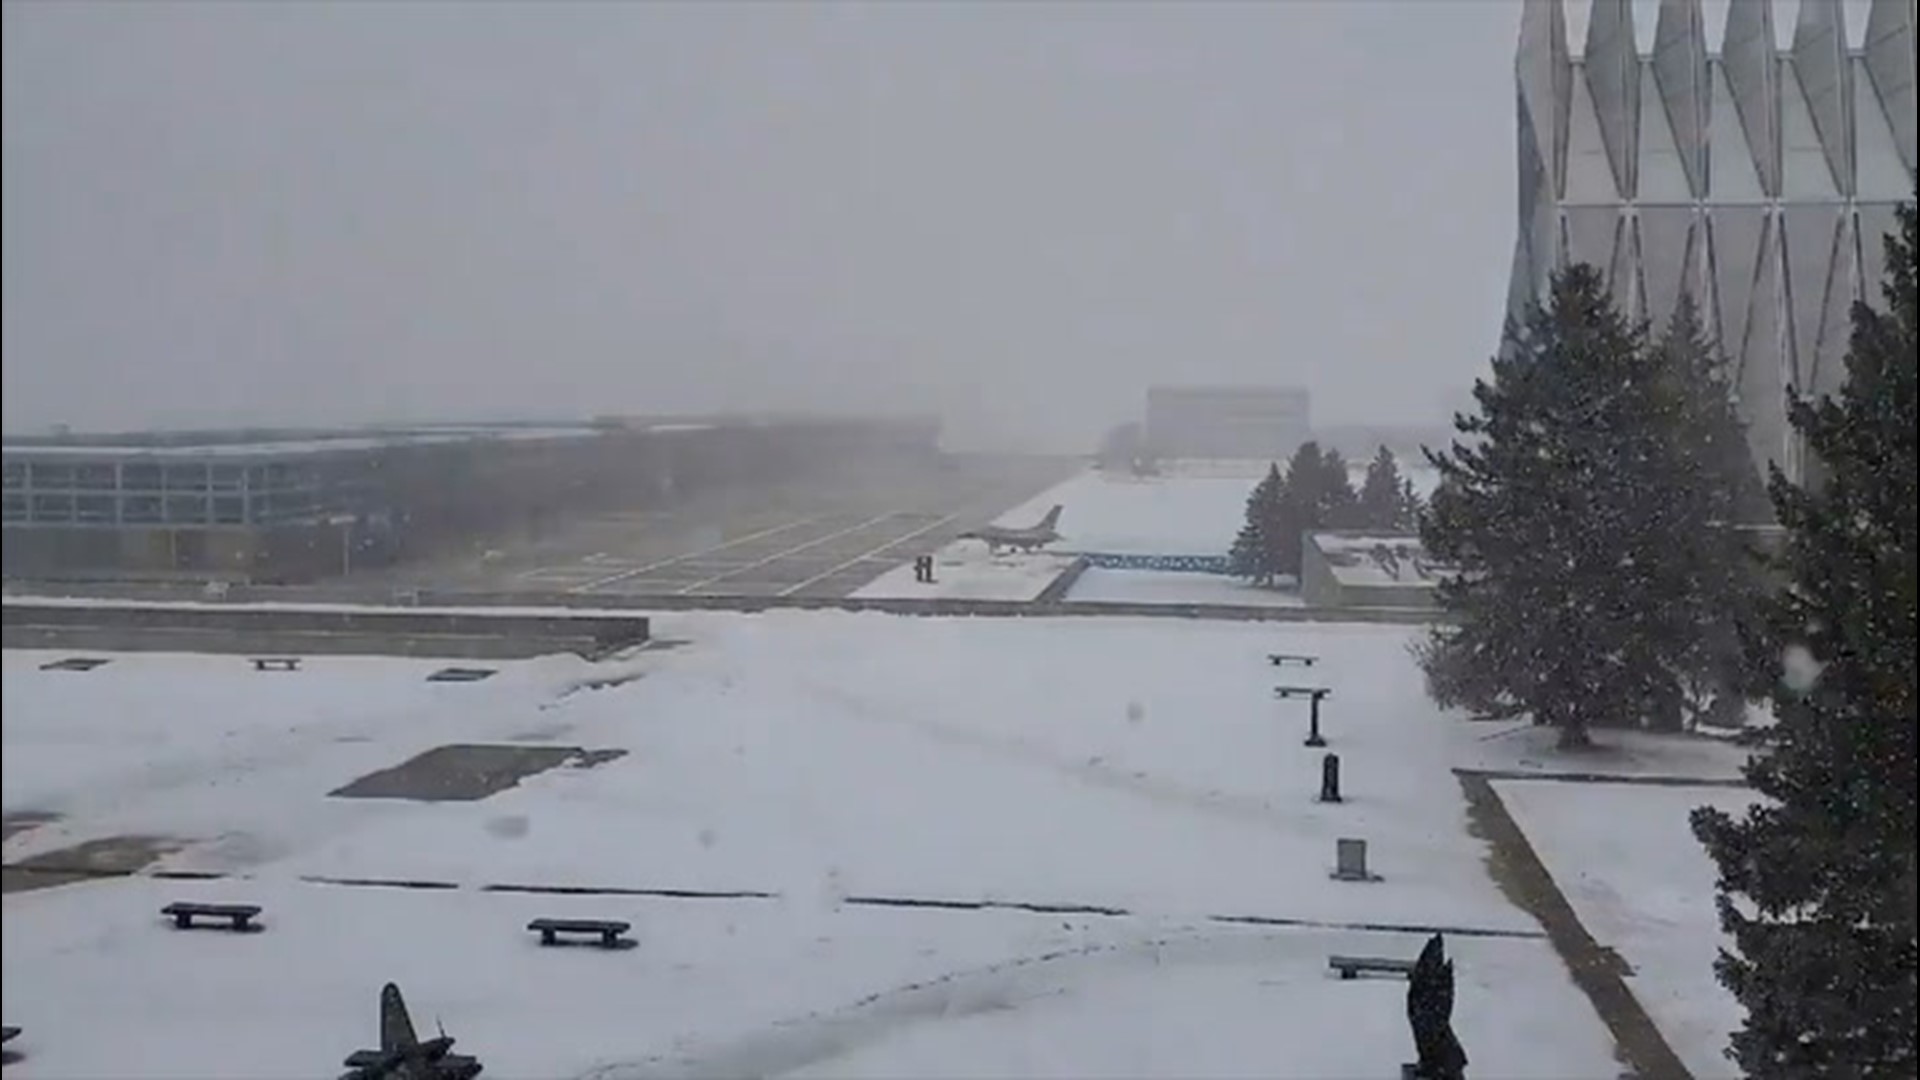 A snow squall quickly moved through the U.S. Air Force Academy in Colorado Springs, Colorado, on Feb. 24.